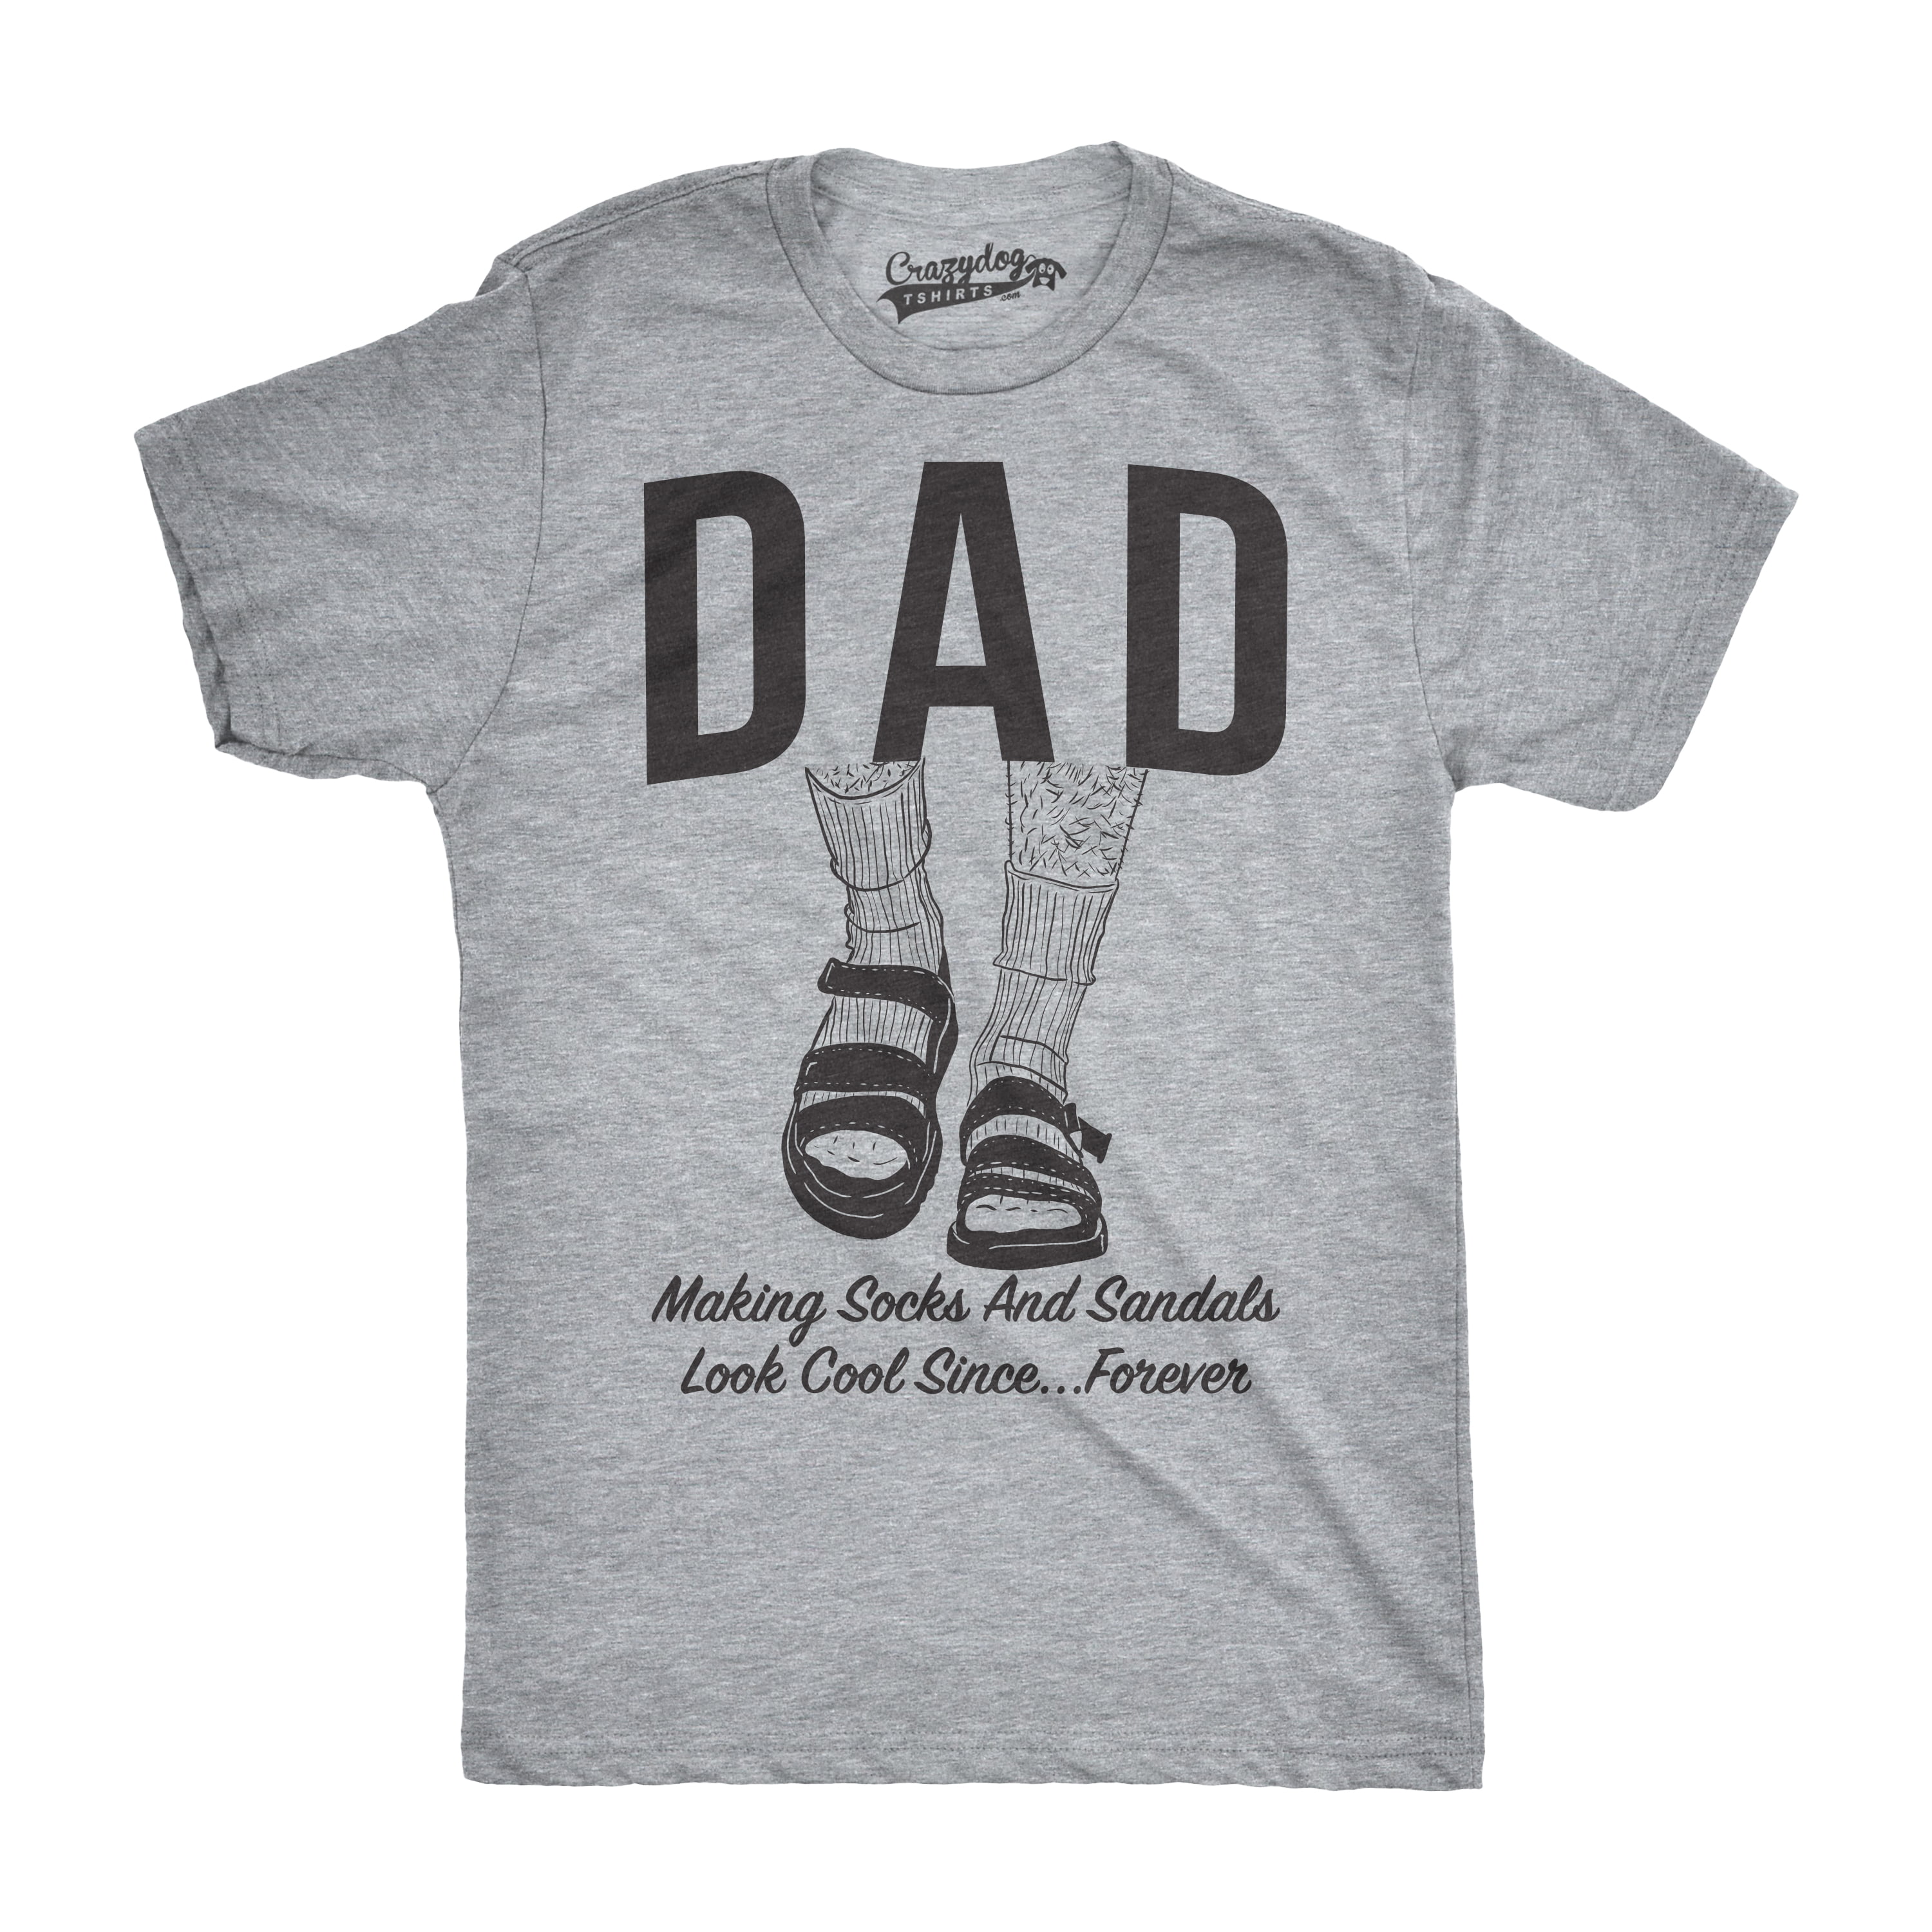 My Favorite Nurse Calls Me Dad Shirt Unisex Vintage Tees Nurse Dad TShirt Gifts for Father's Day Funny Mens Papa Daddy T-Shirts Awesome Pops